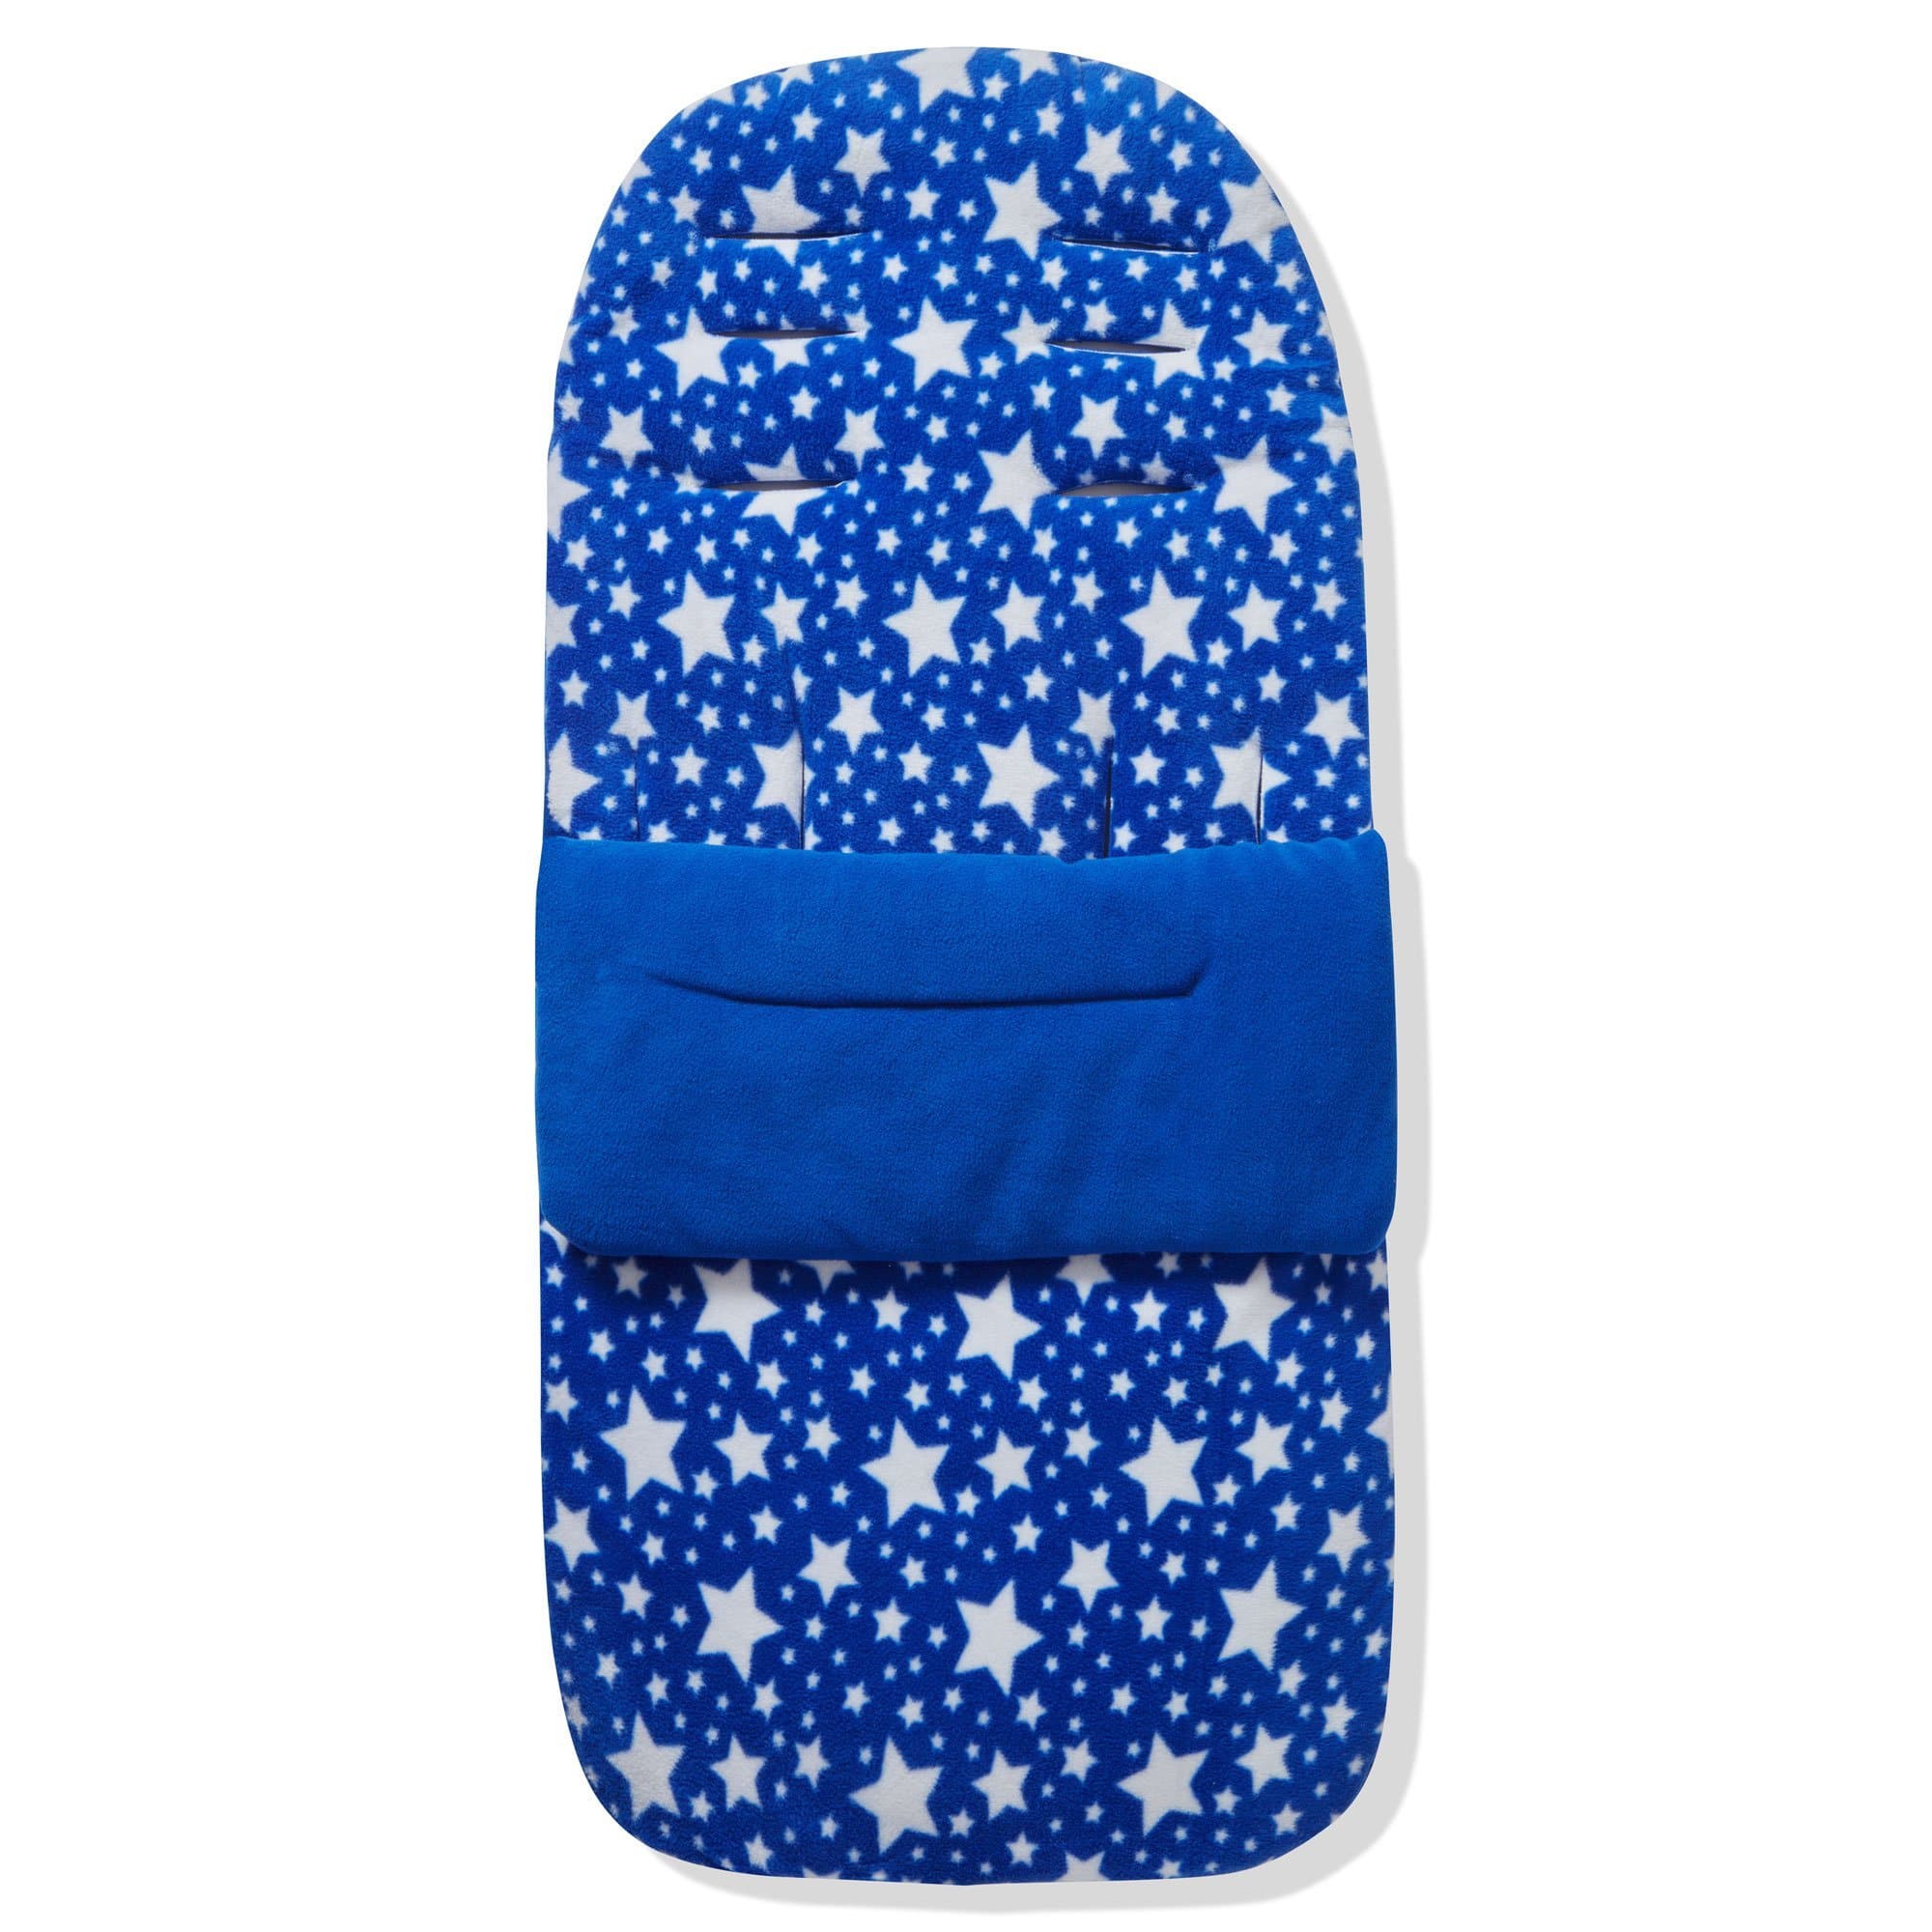 Fleece Footmuff / Cosy Toes Compatible with Tutti Bambini - Blue Star / Fits All Models | For Your Little One